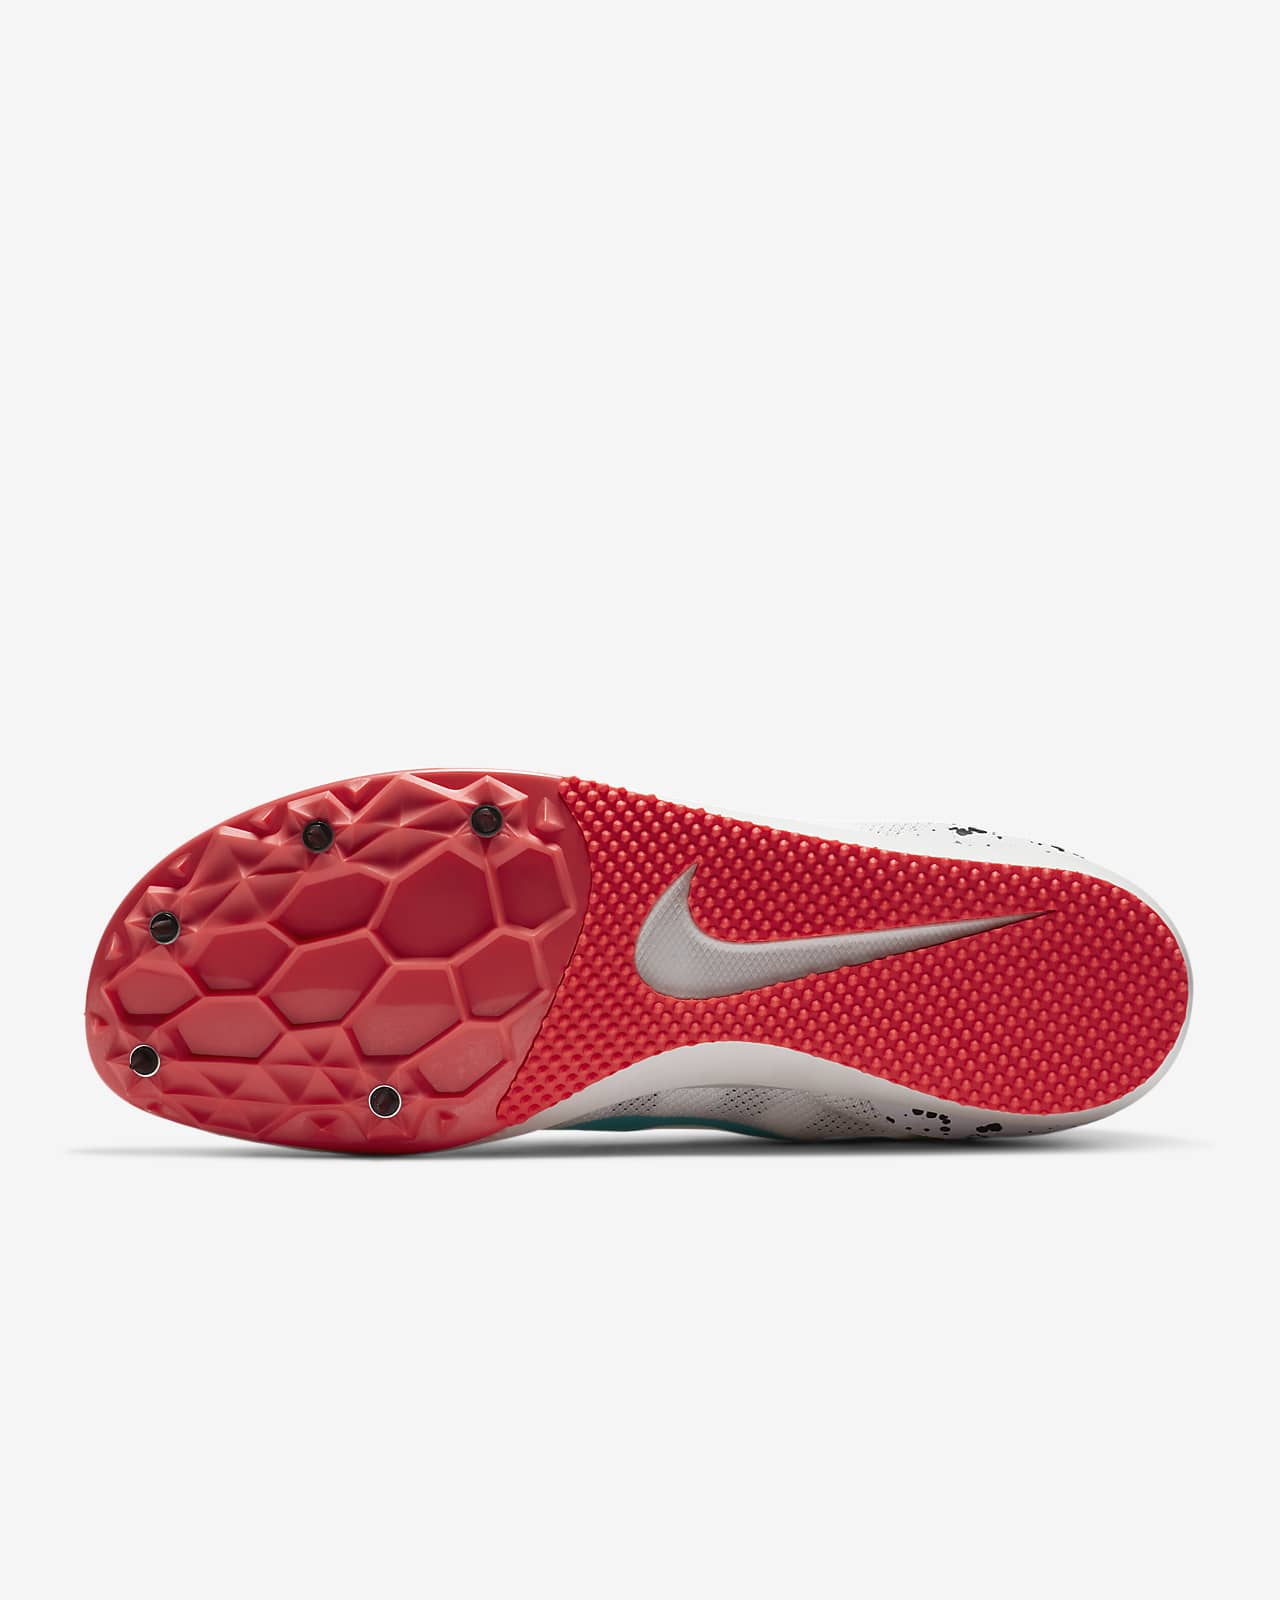 all red track spikes